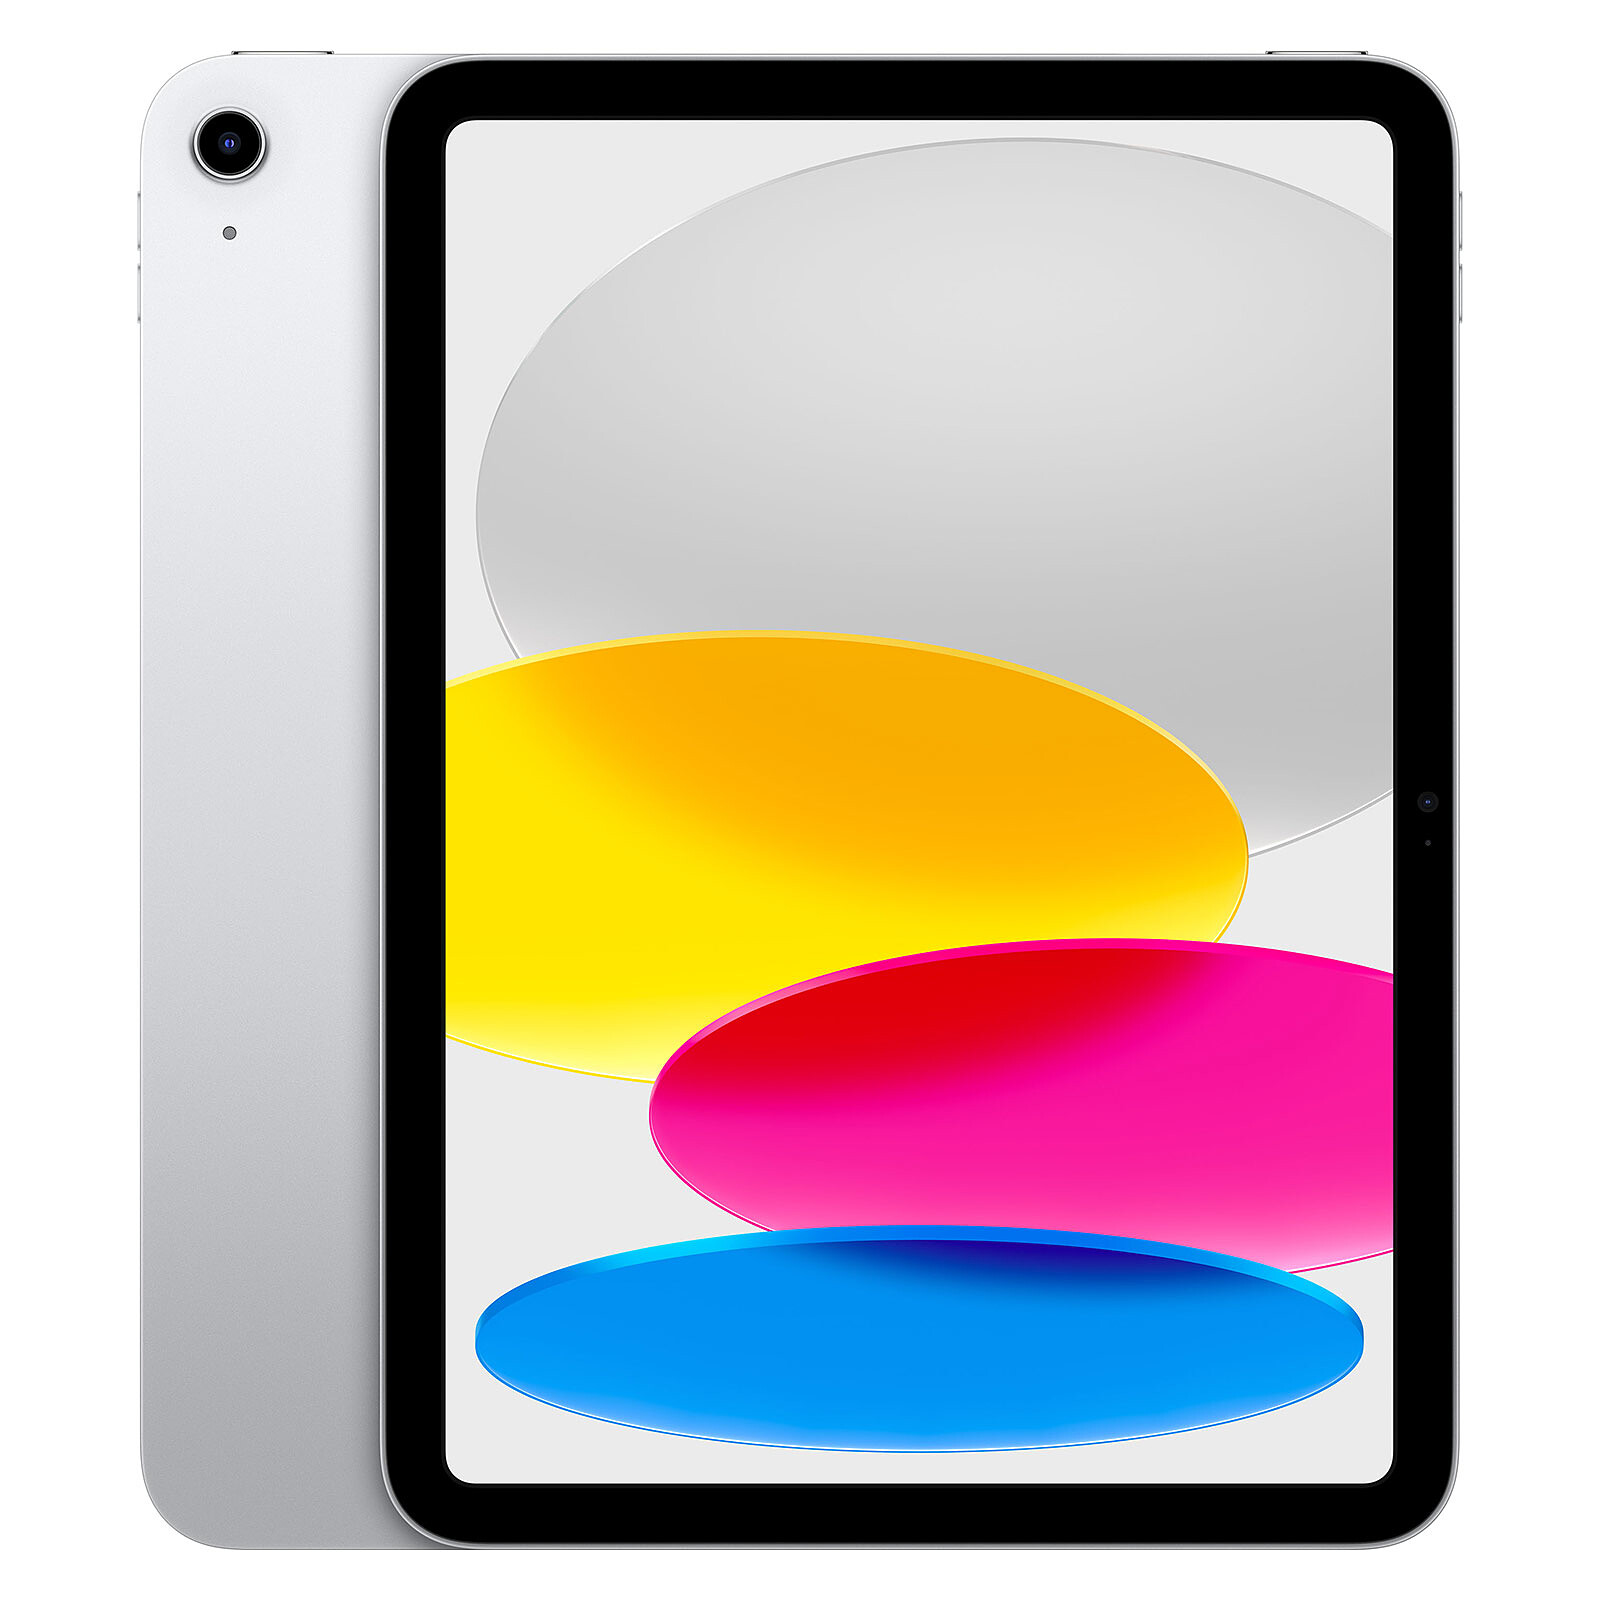 Apple iPad Air (2020) Wi-Fi 256 Go Argent - Tablette tactile